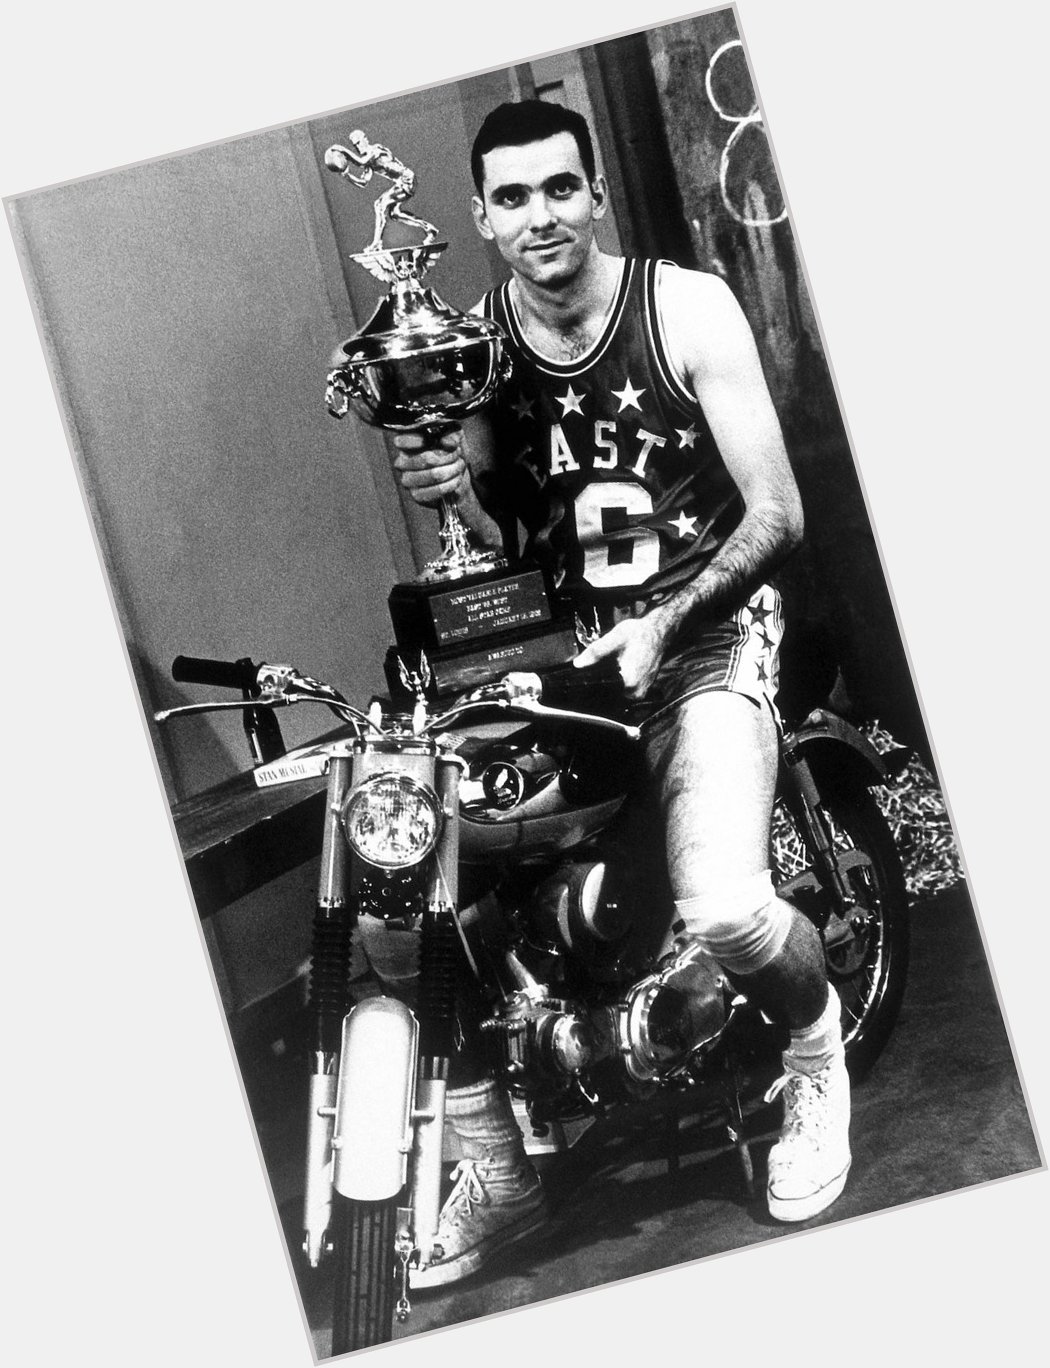 To wish Jerry Lucas a Happy Birthday!   : NBA Photo Library/NBAE via Getty Images 